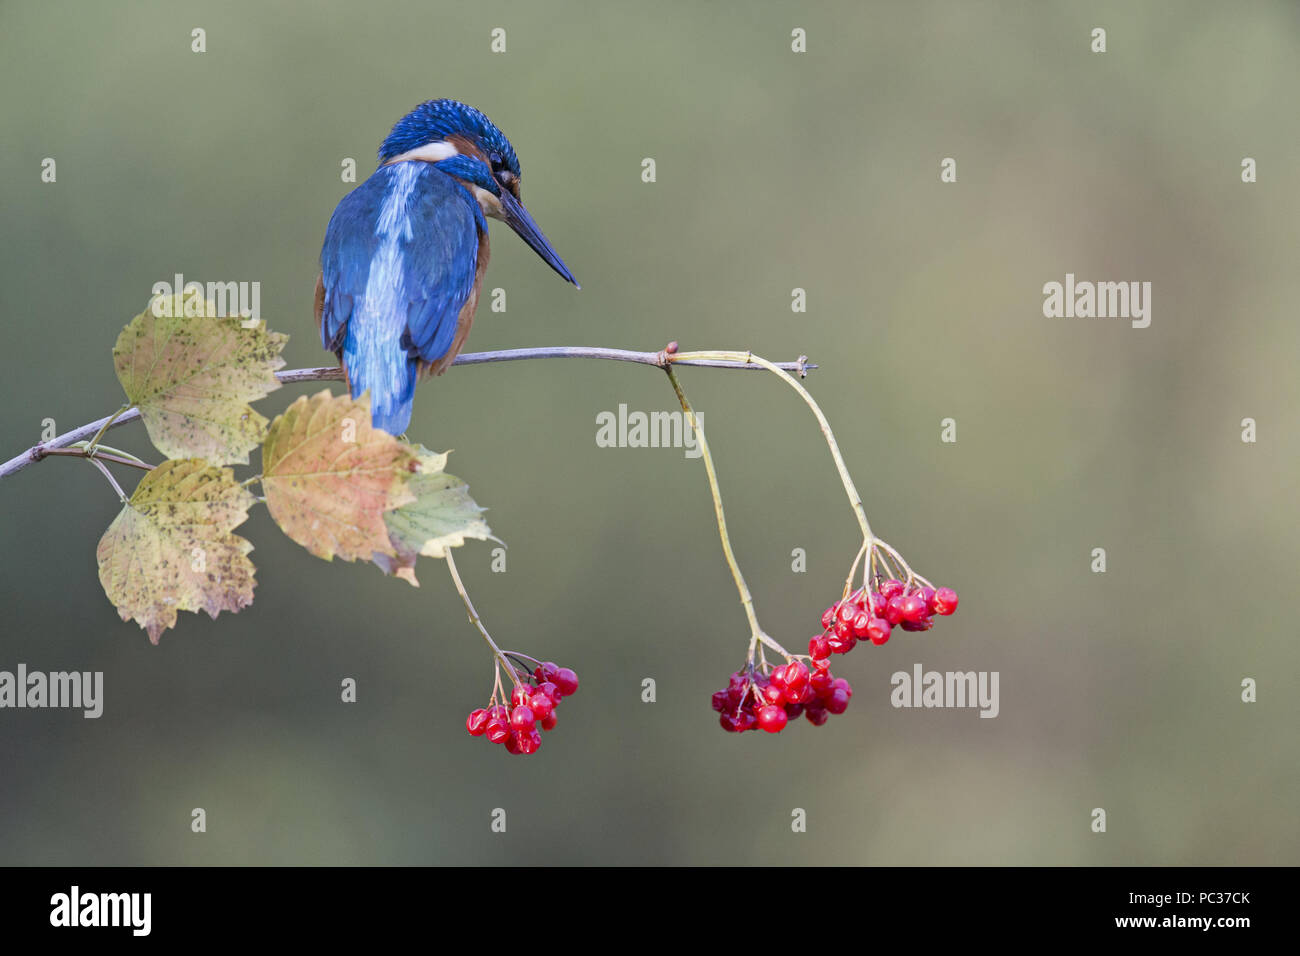 Common Kingfisher (Alcedo atthis) adult male, perched on Guelder Rose (Viburnum opalus) branch with berries, Suffolk, England, November Stock Photo